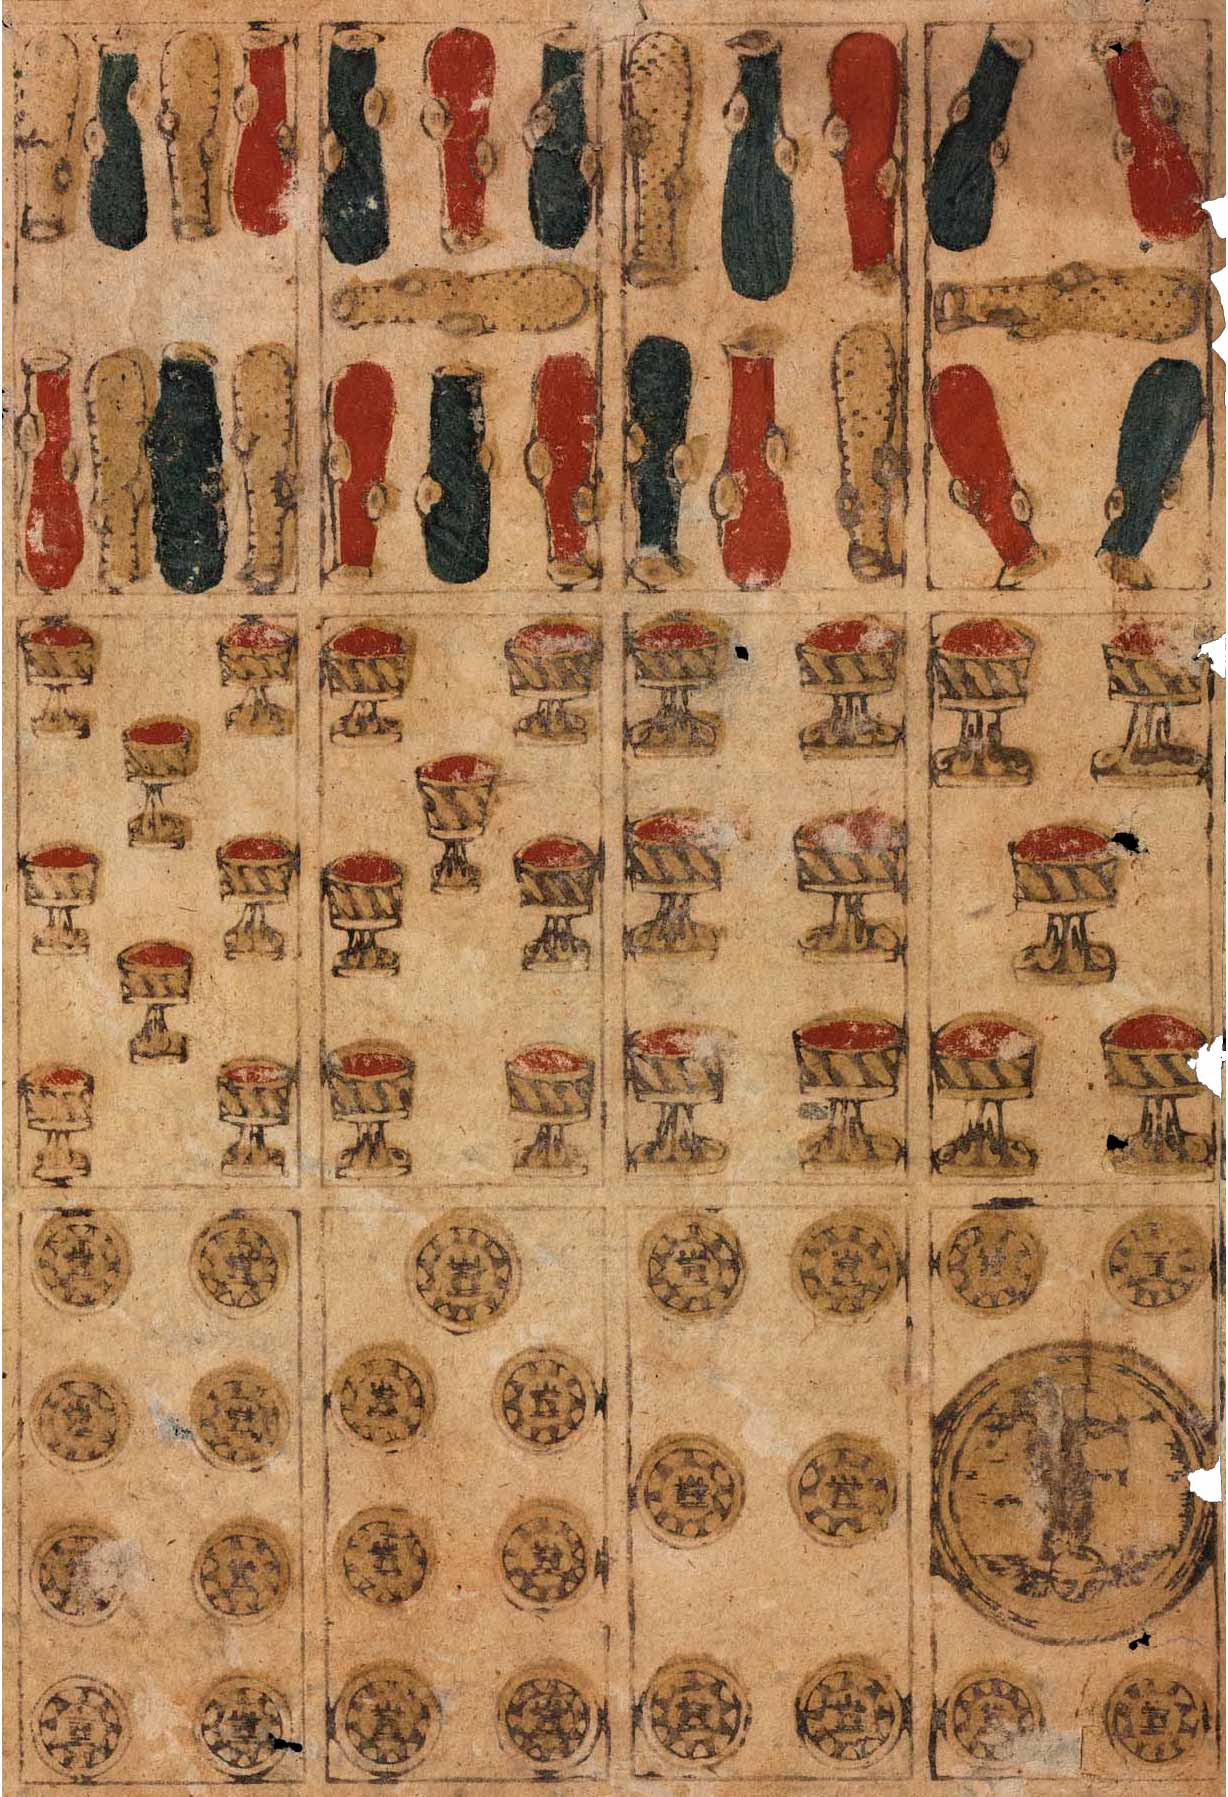 Spanish-suited deck made in Toledo in 1584